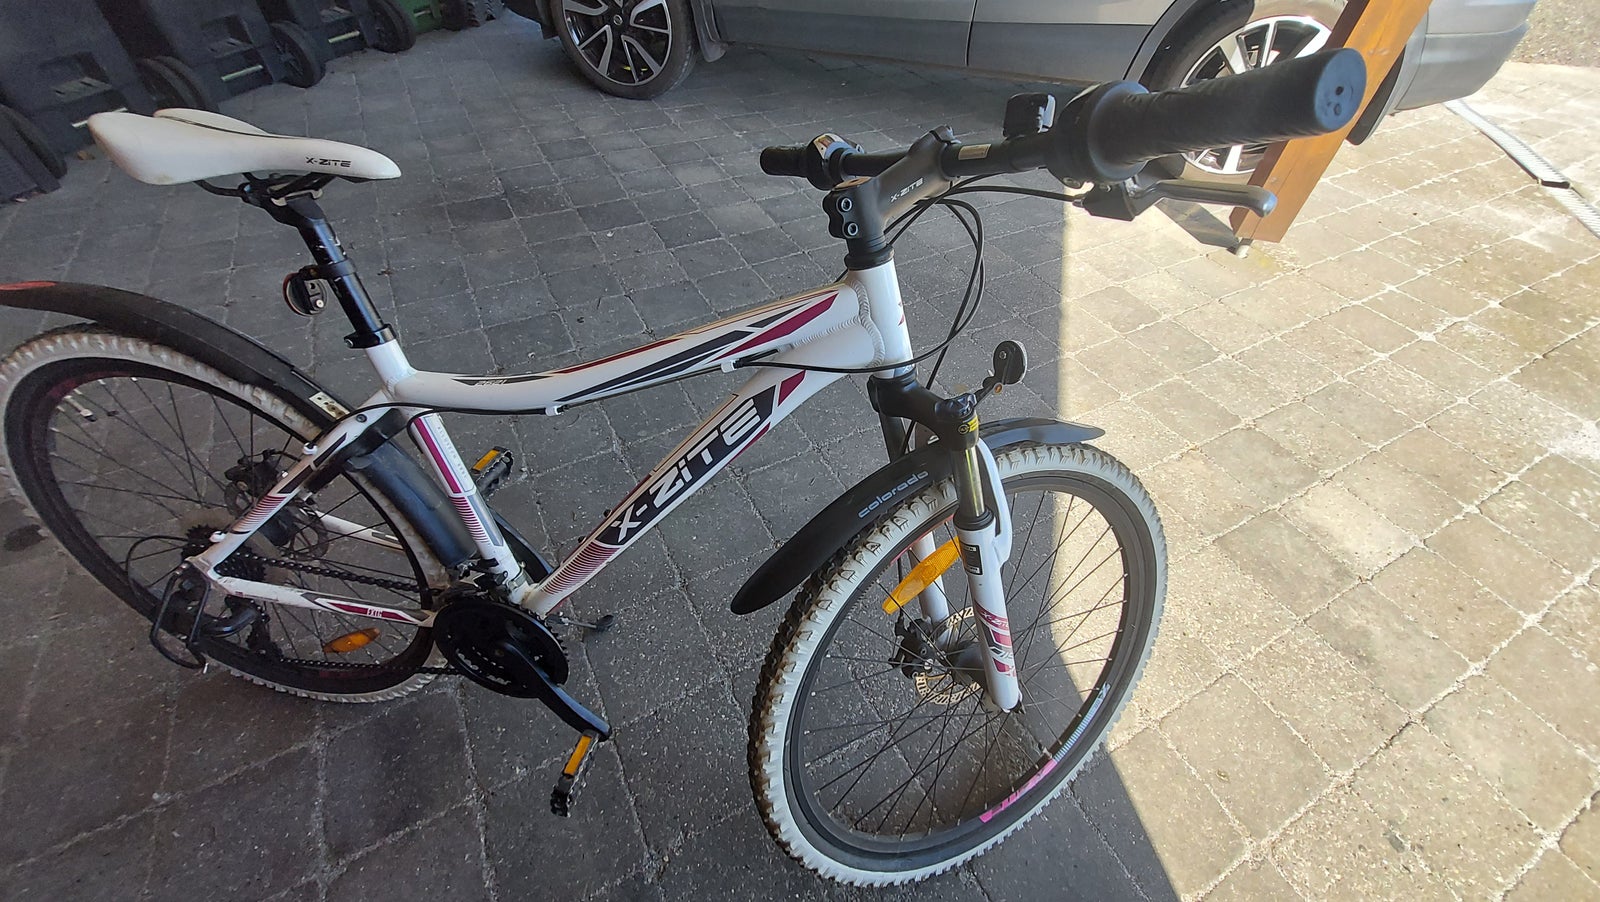 X-zite mtb, anden mountainbike, 26 tommer